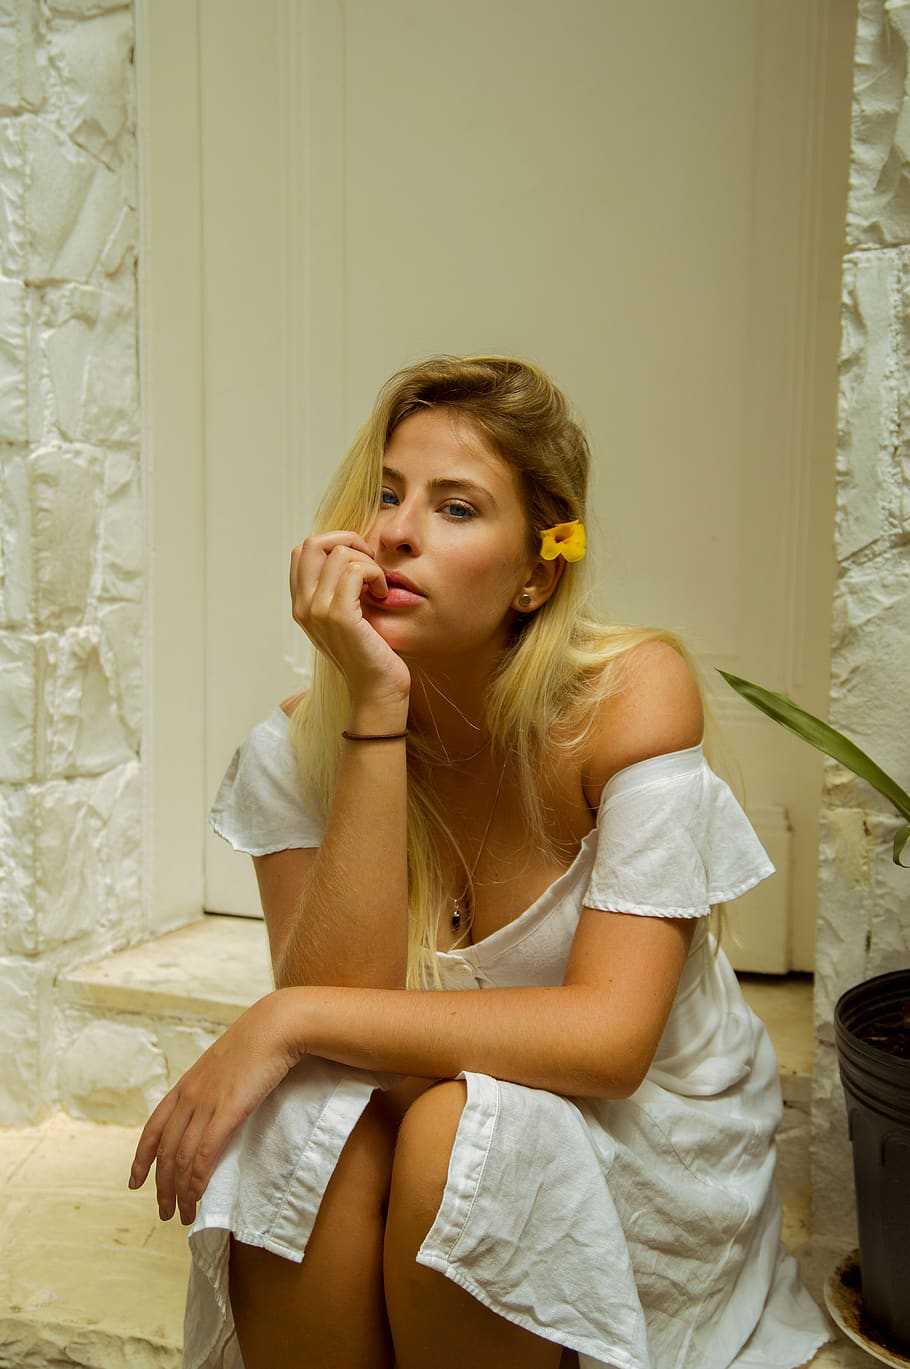 Woman in White Dress Sitting Near Closed Door, attractive, beautiful